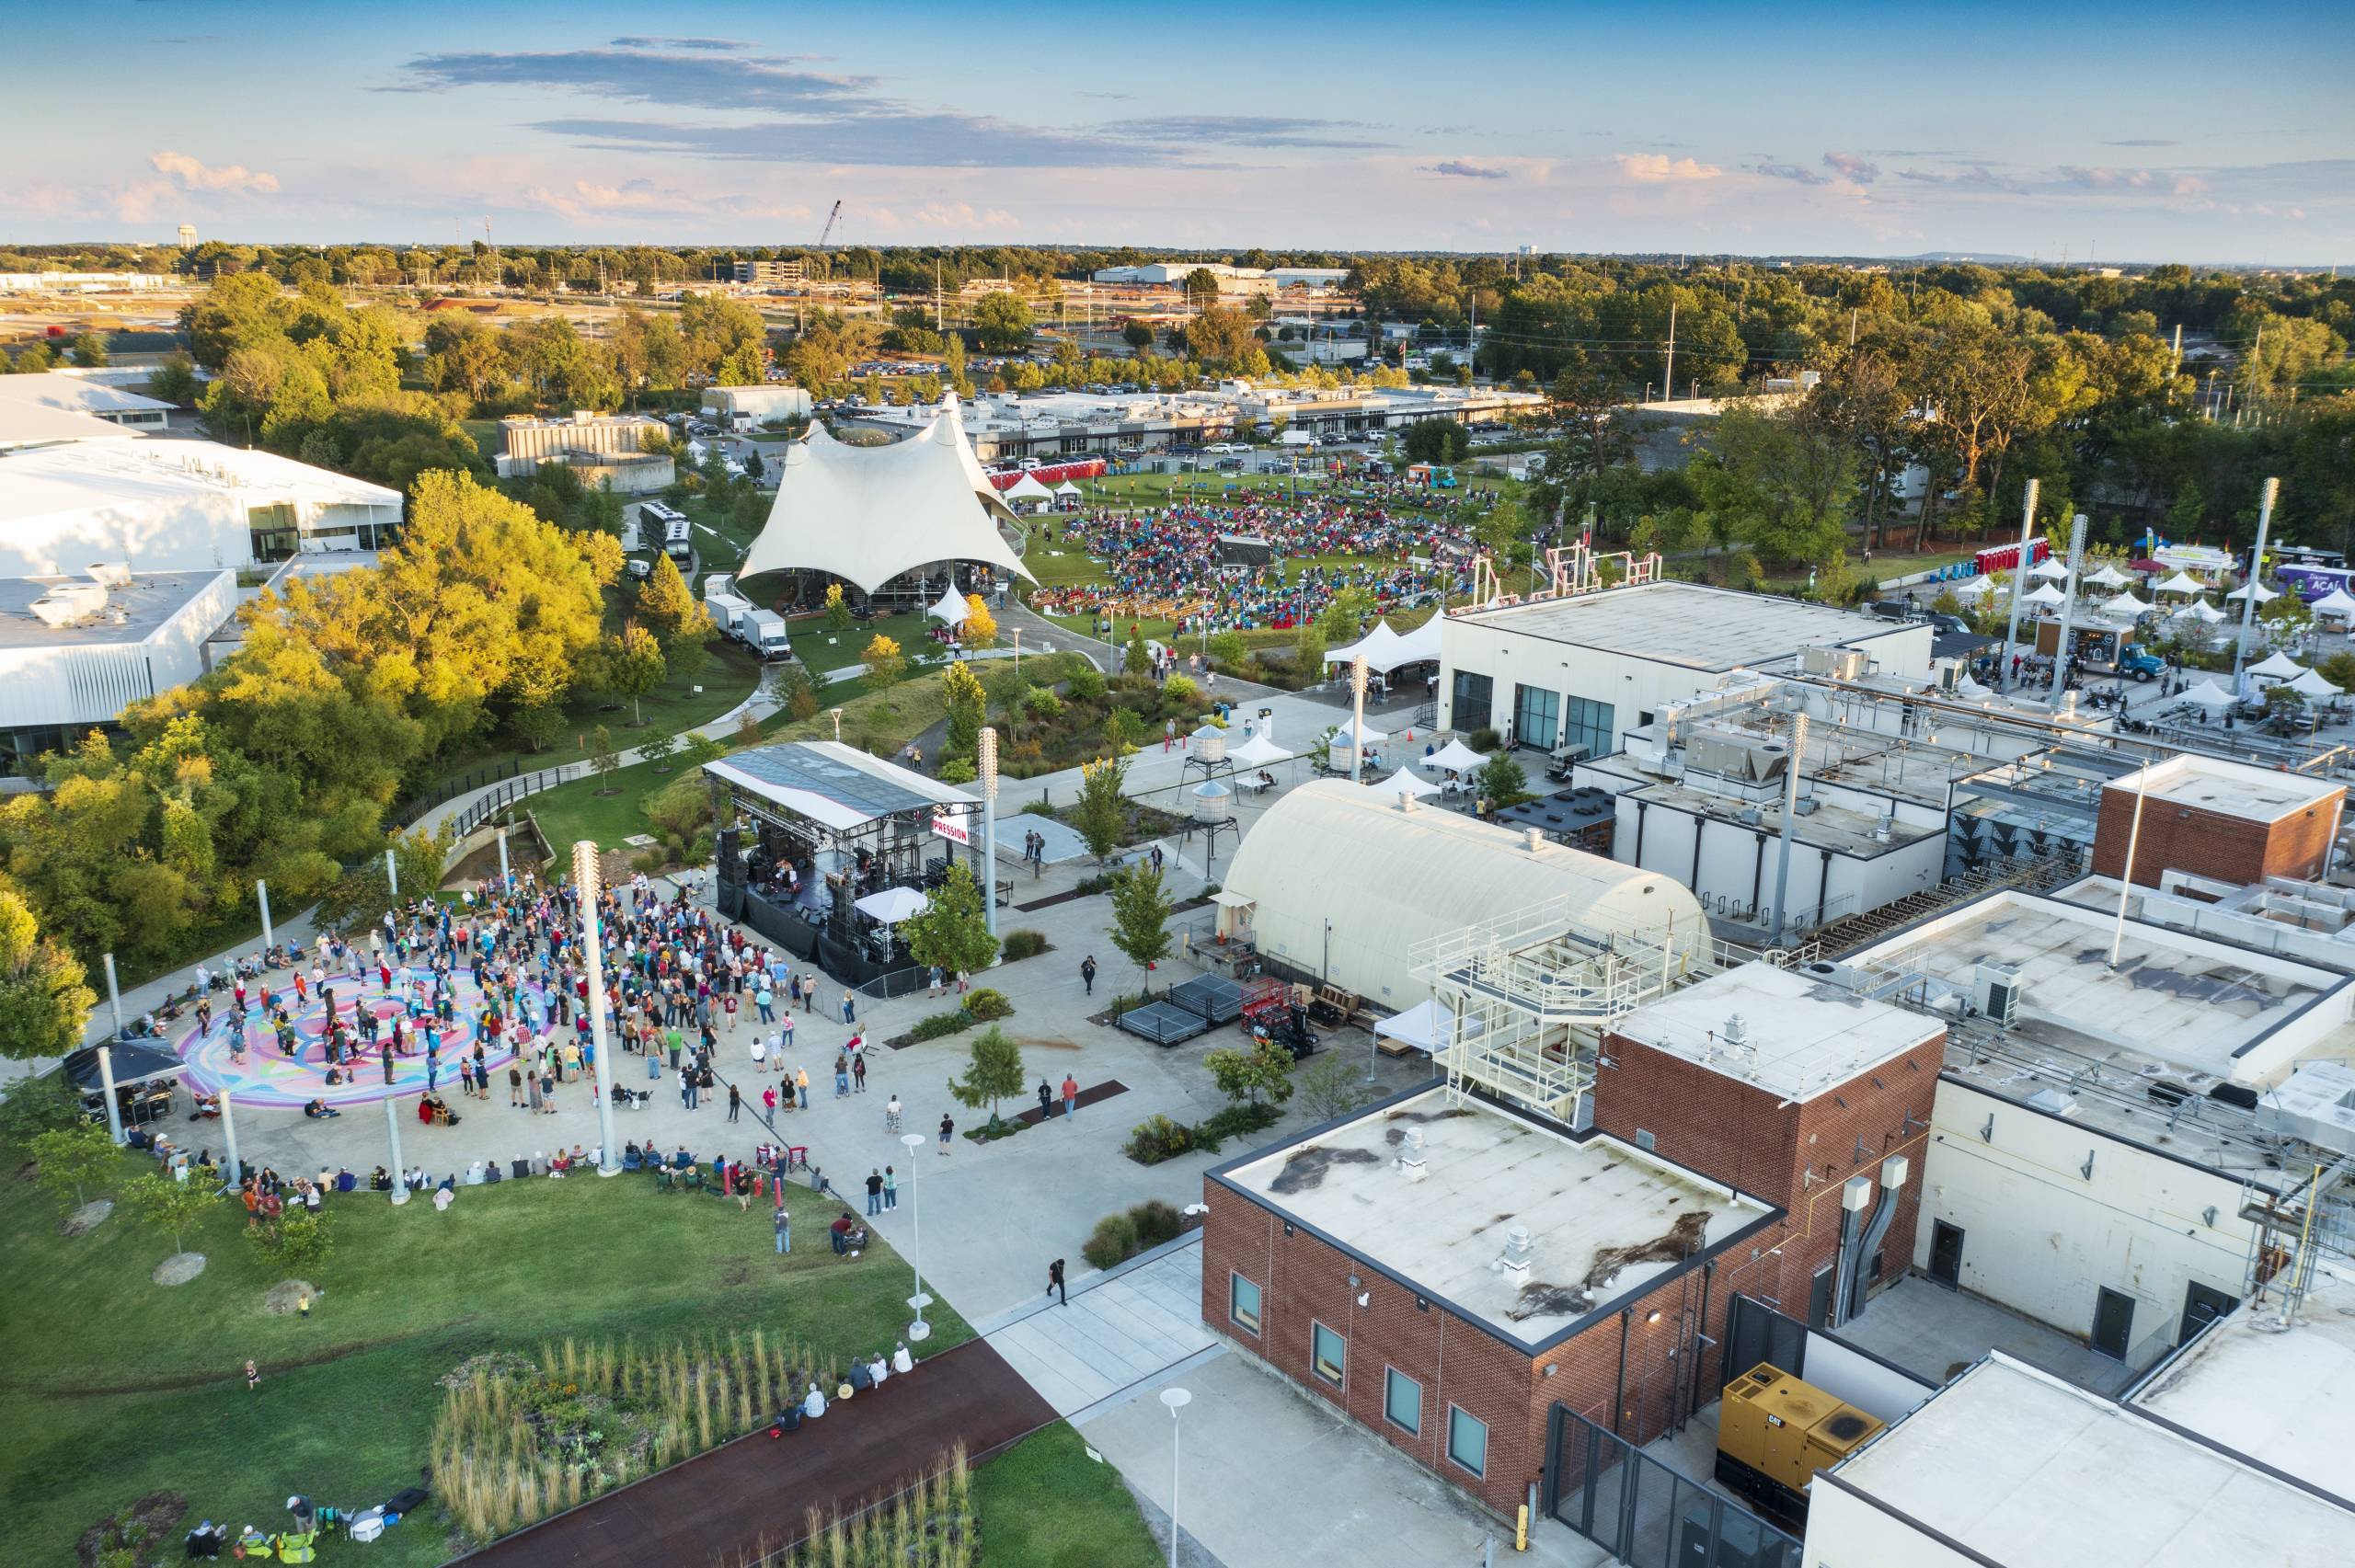 An aerial view of the Momentary and the Momentary Green featuring a canopy tent for performances and people listening to music.